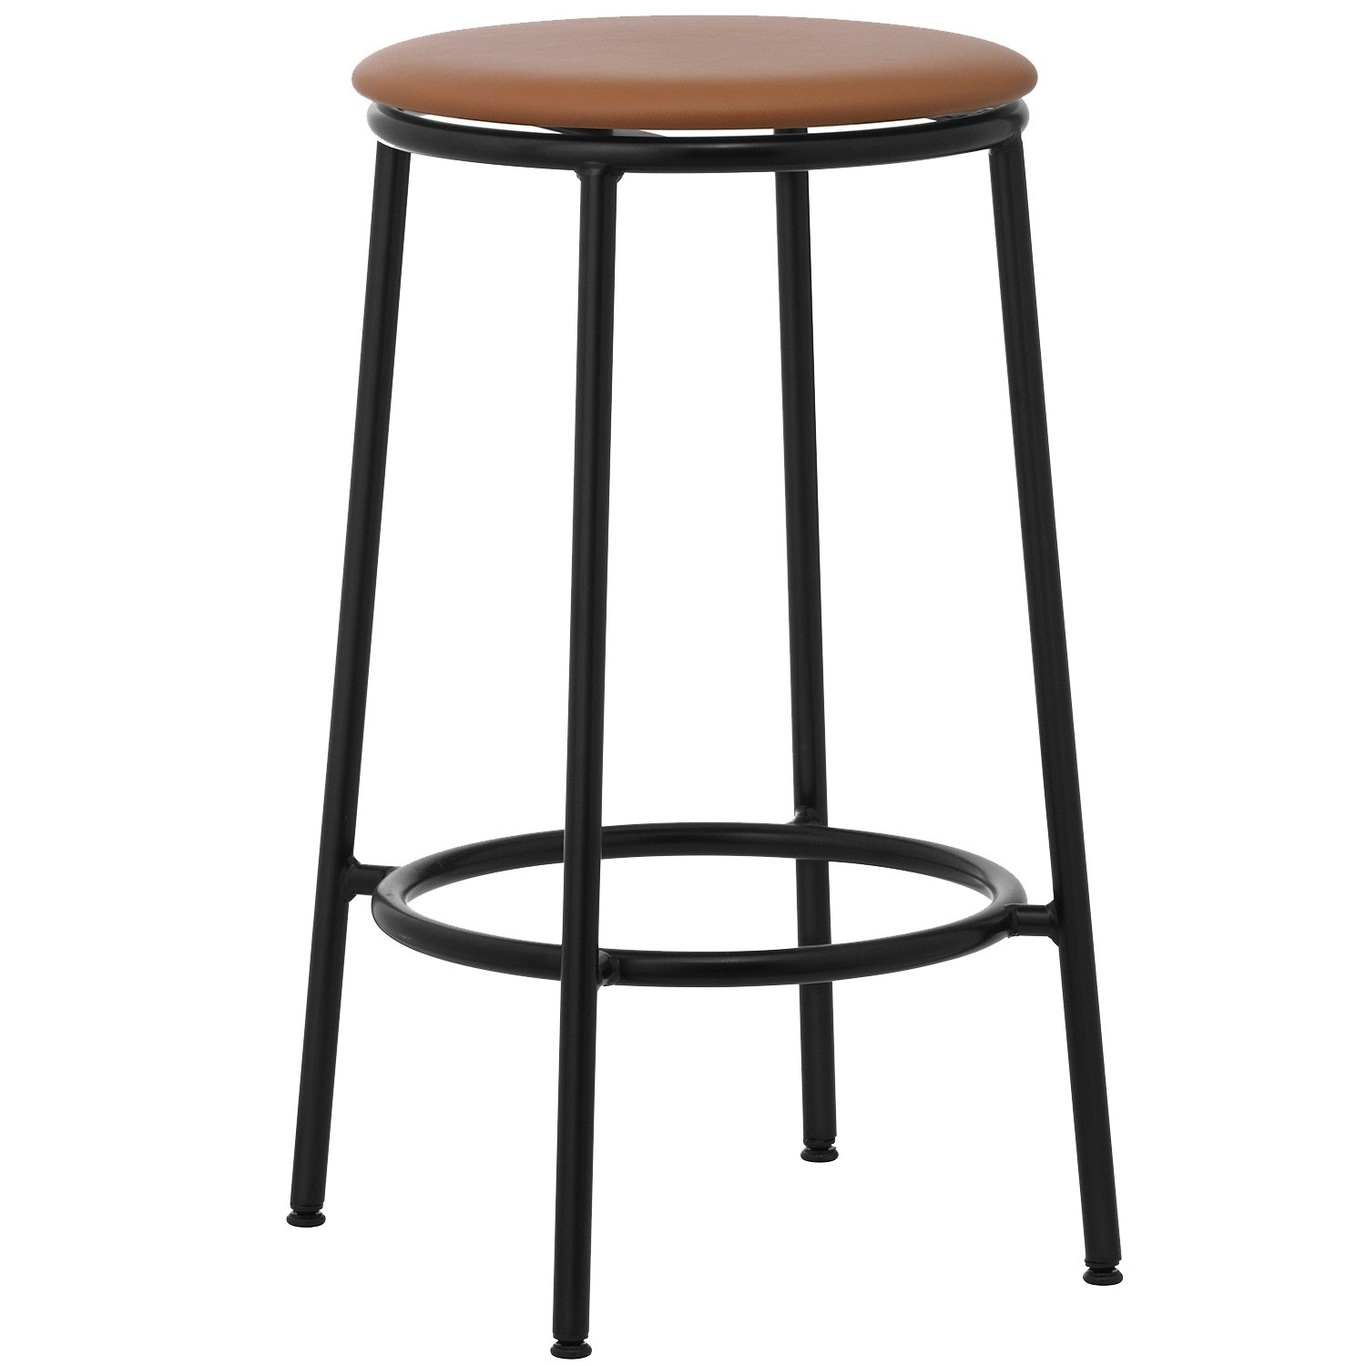 Circa Bar Stool 65 cm, Brown Leather / Ultra leather 41574